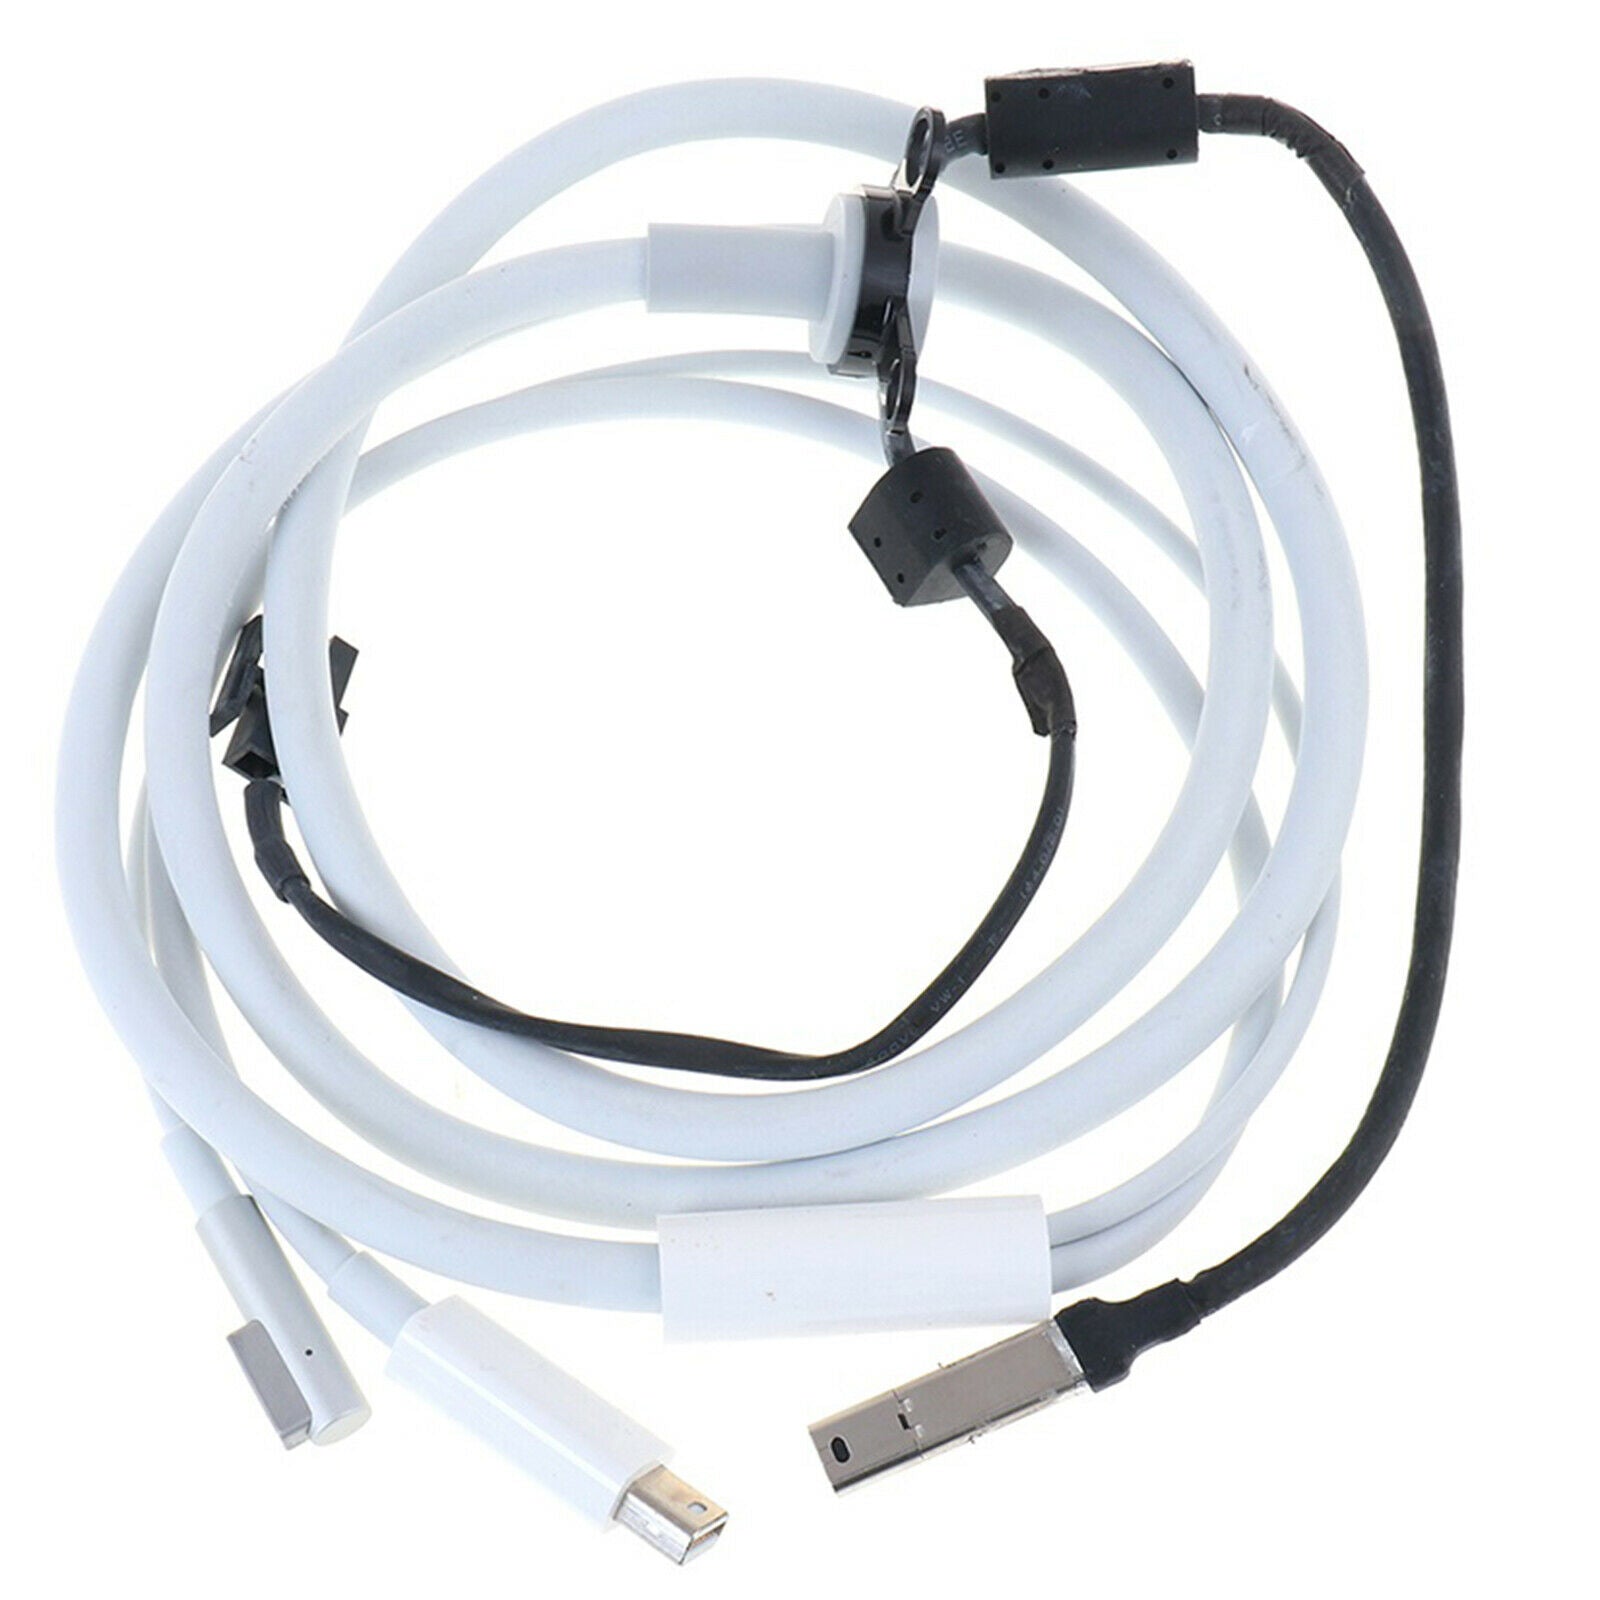 1 PcsAll-In-One For Thunderbolt Cinema display Cable 922-9941 2-240-0768.